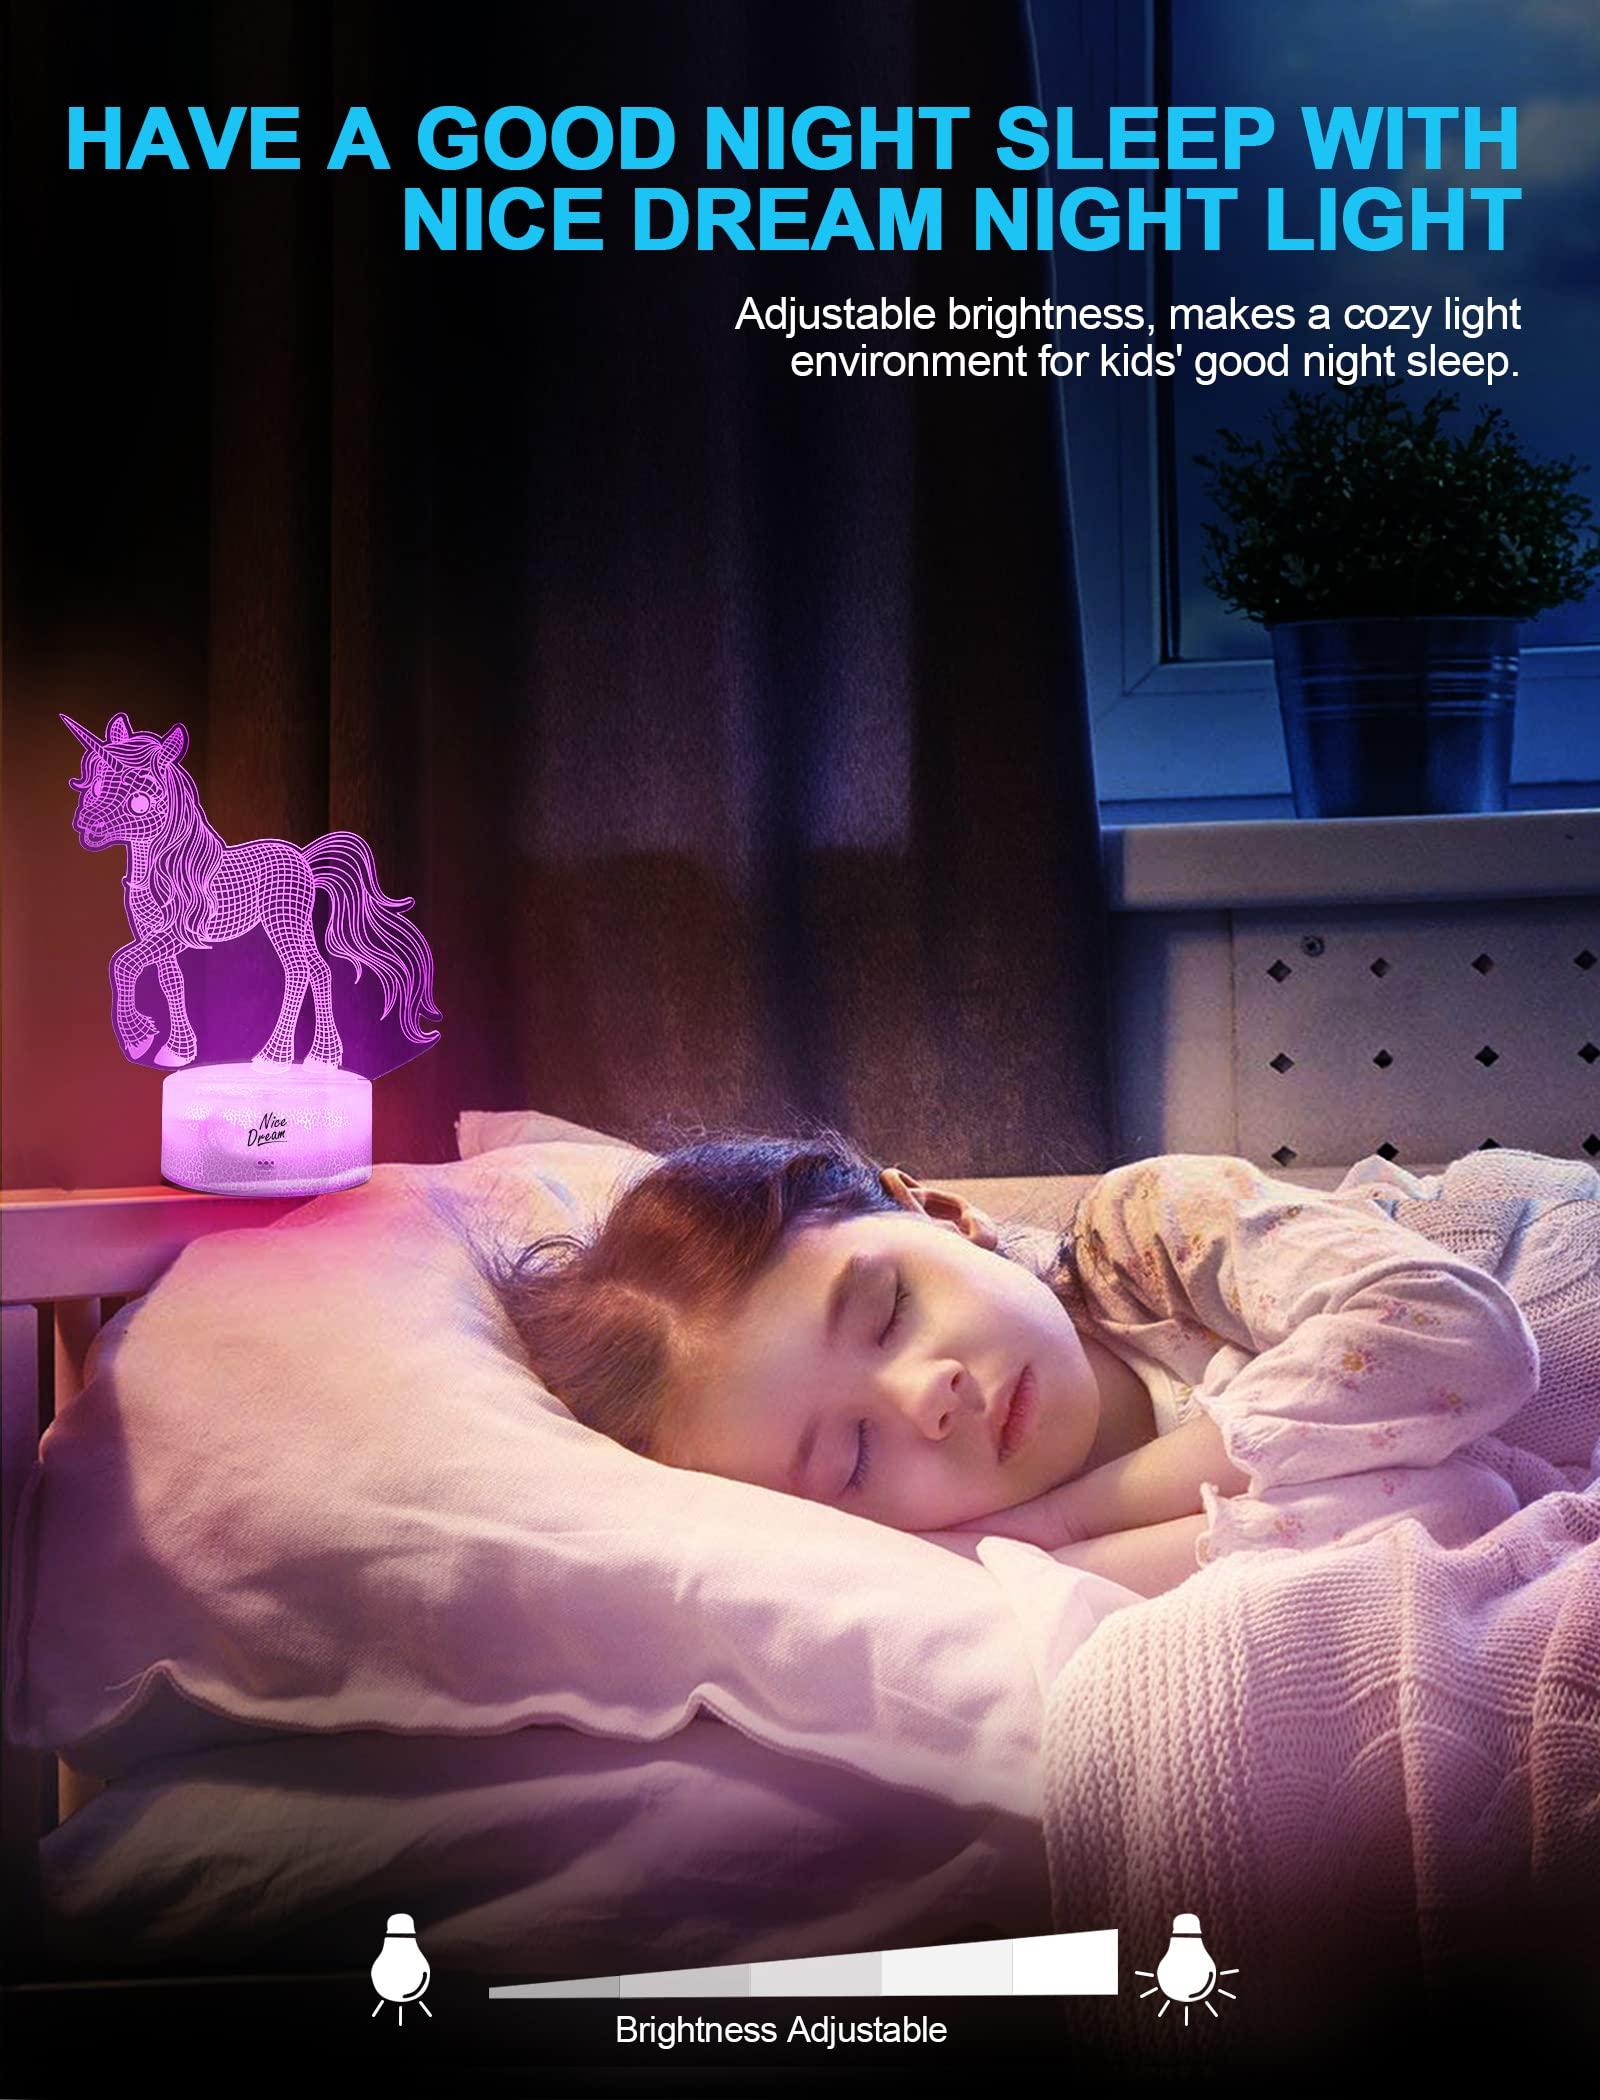 Nice Dream Unicorn Night Light for Kids,3D Illusion Night Lamp,16 Colors Changes with Remote Control,Unicorns Gifts for Girls,Toys Birthday Bedroom Decor for Children Boys 4